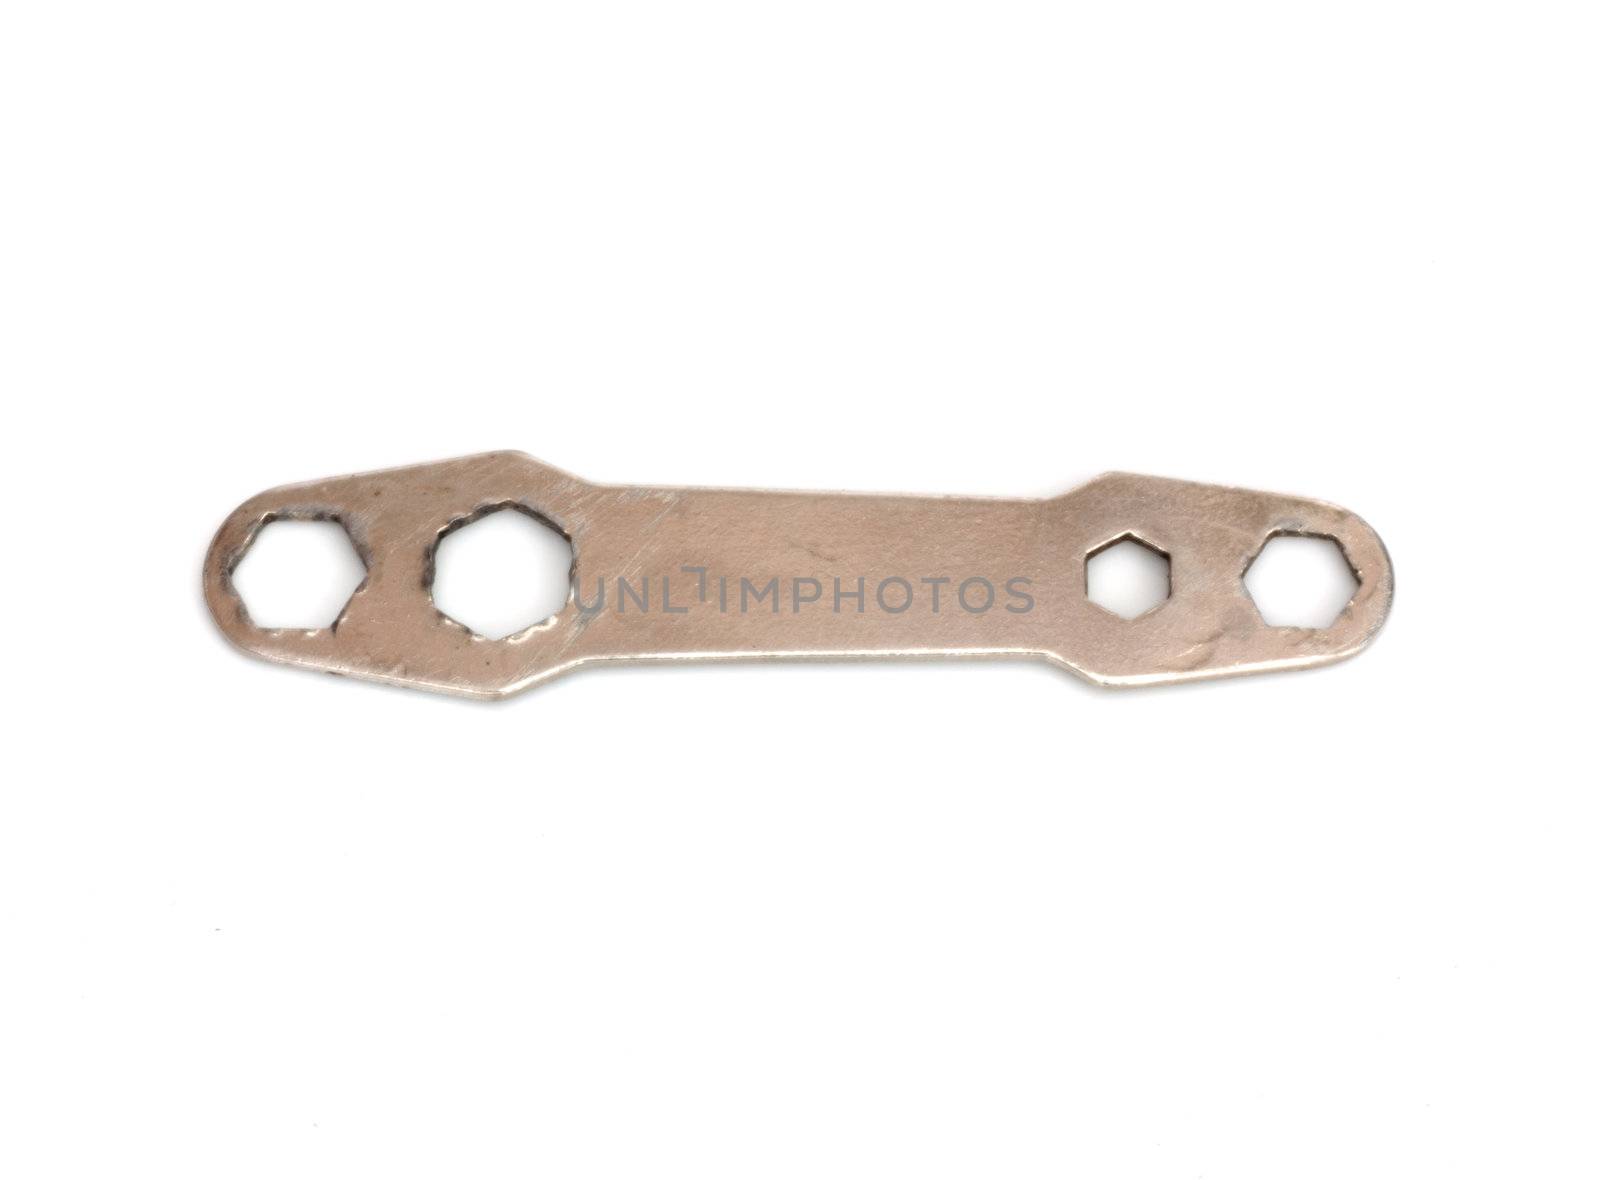 Wrench isolated on a white background 